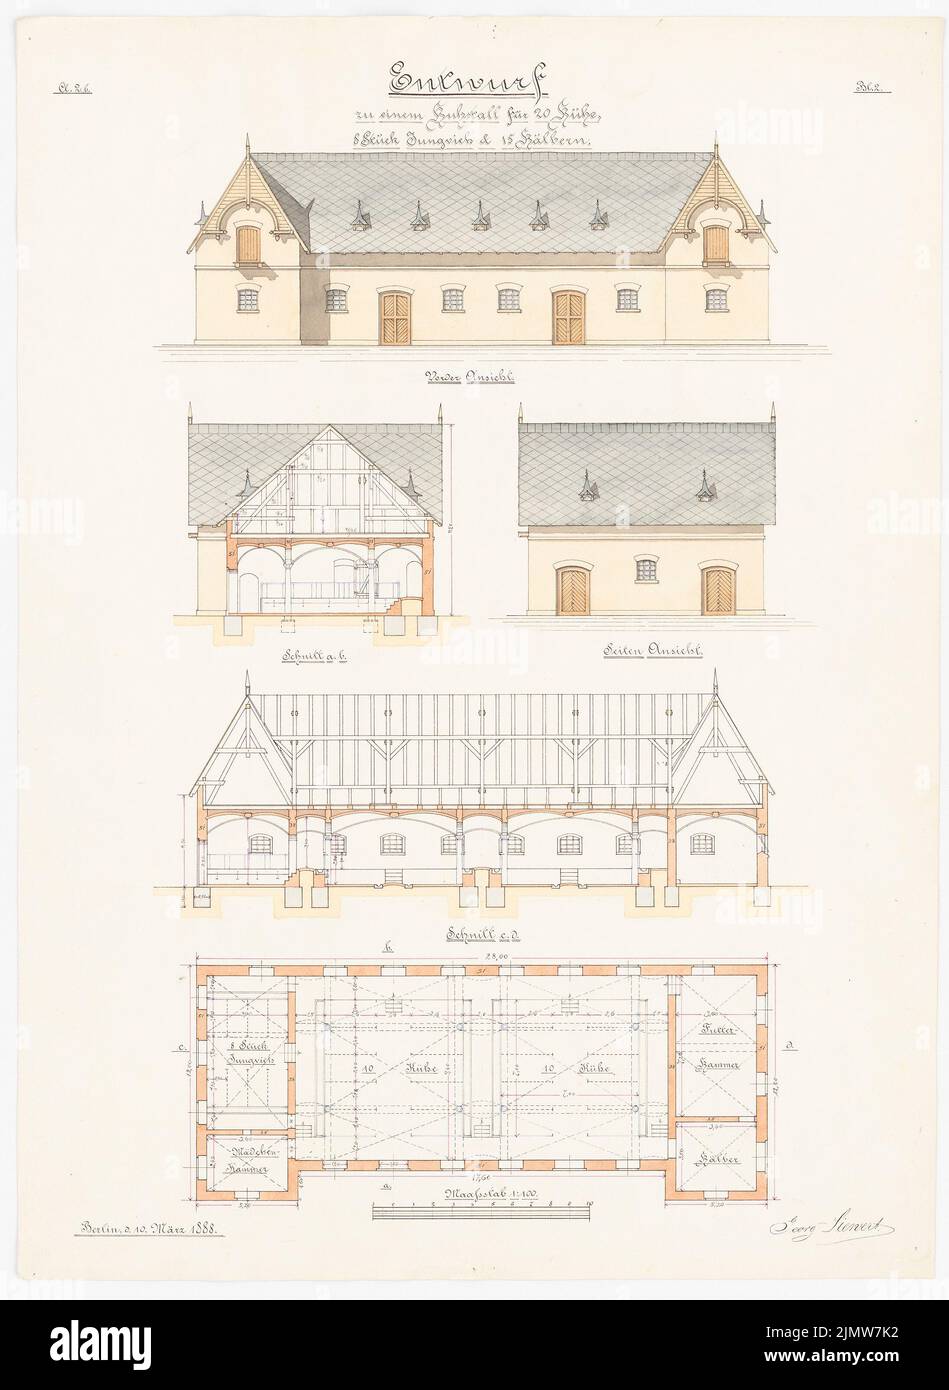 Siewert Georg, cowshed for 20 cows, 8 young cattle and 15 calves (10.03.1888): View, side view, cut A-B, cut C-D, floor plan 1: 100. Ink, pencil, ink colored, watercolor on cardboard, 65.8 x 48 cm (including scan edges) Siewert Georg : Kuhstall für 20 Kühe, 8 Jungvieh und 15 Kälber Stock Photo